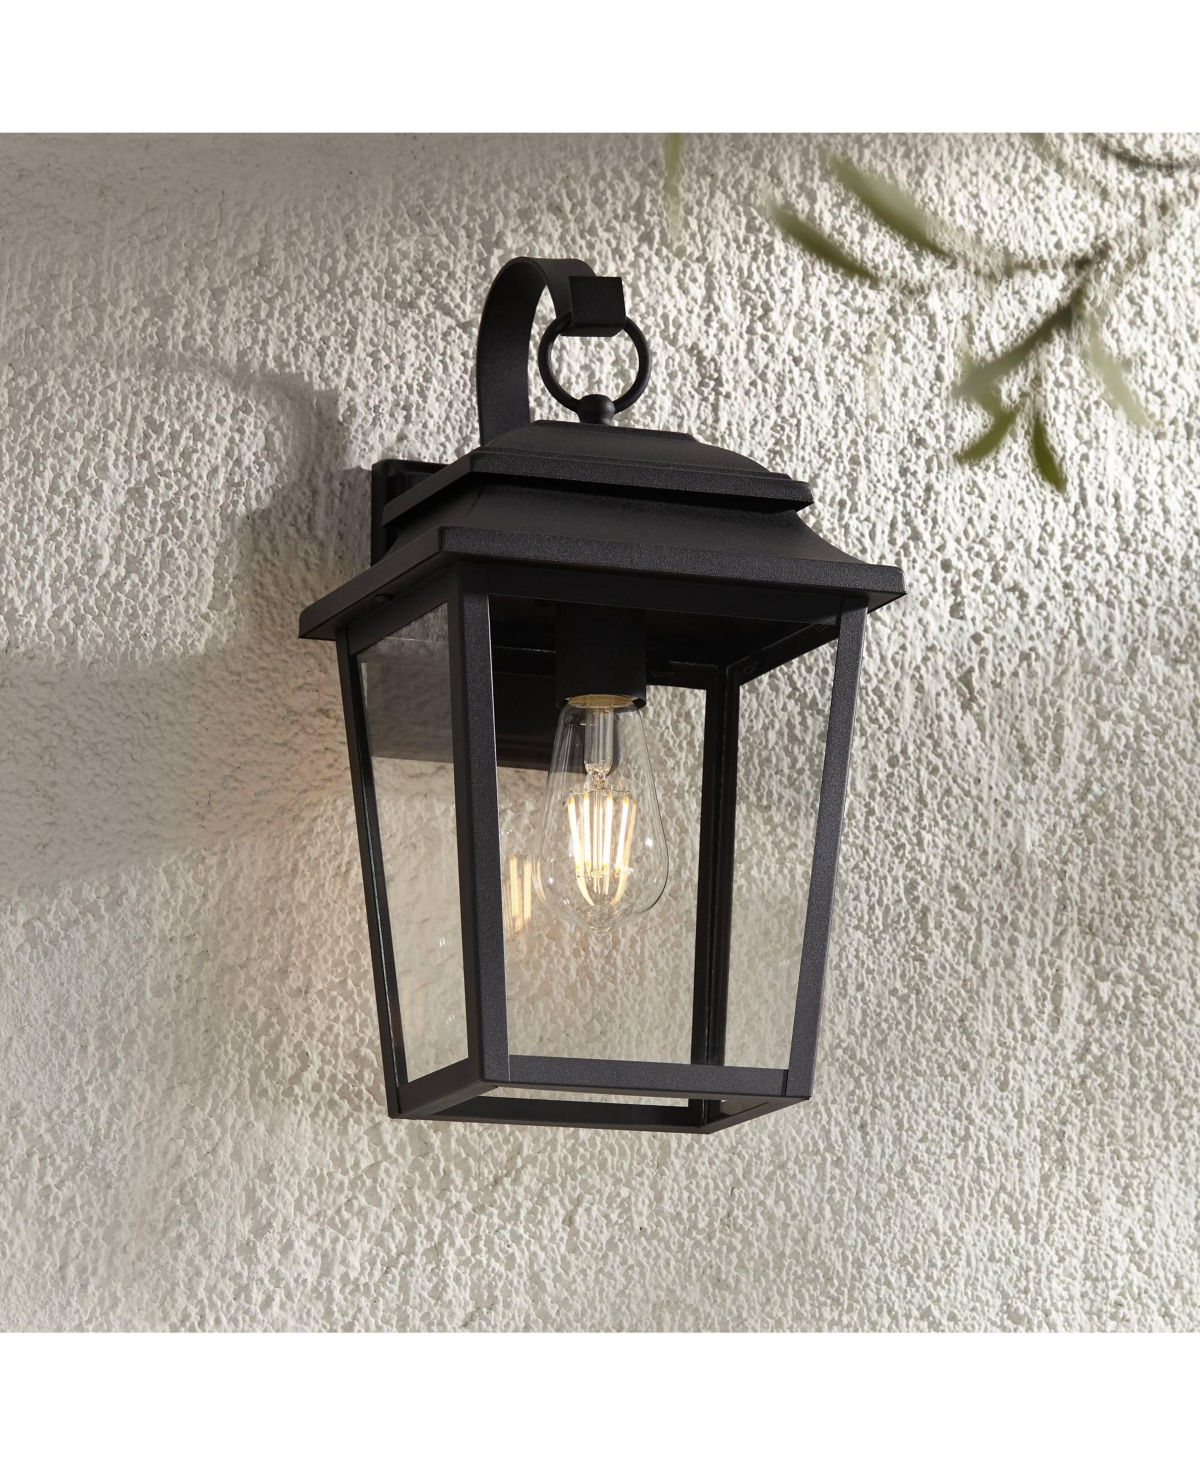 Bellis Verde Outdoor Wall Light Sconce Fixture Texturized Black Steel 15 1/4" Clear Glass Lantern for Exterior House Porch Patio Outside Deck Garage Y